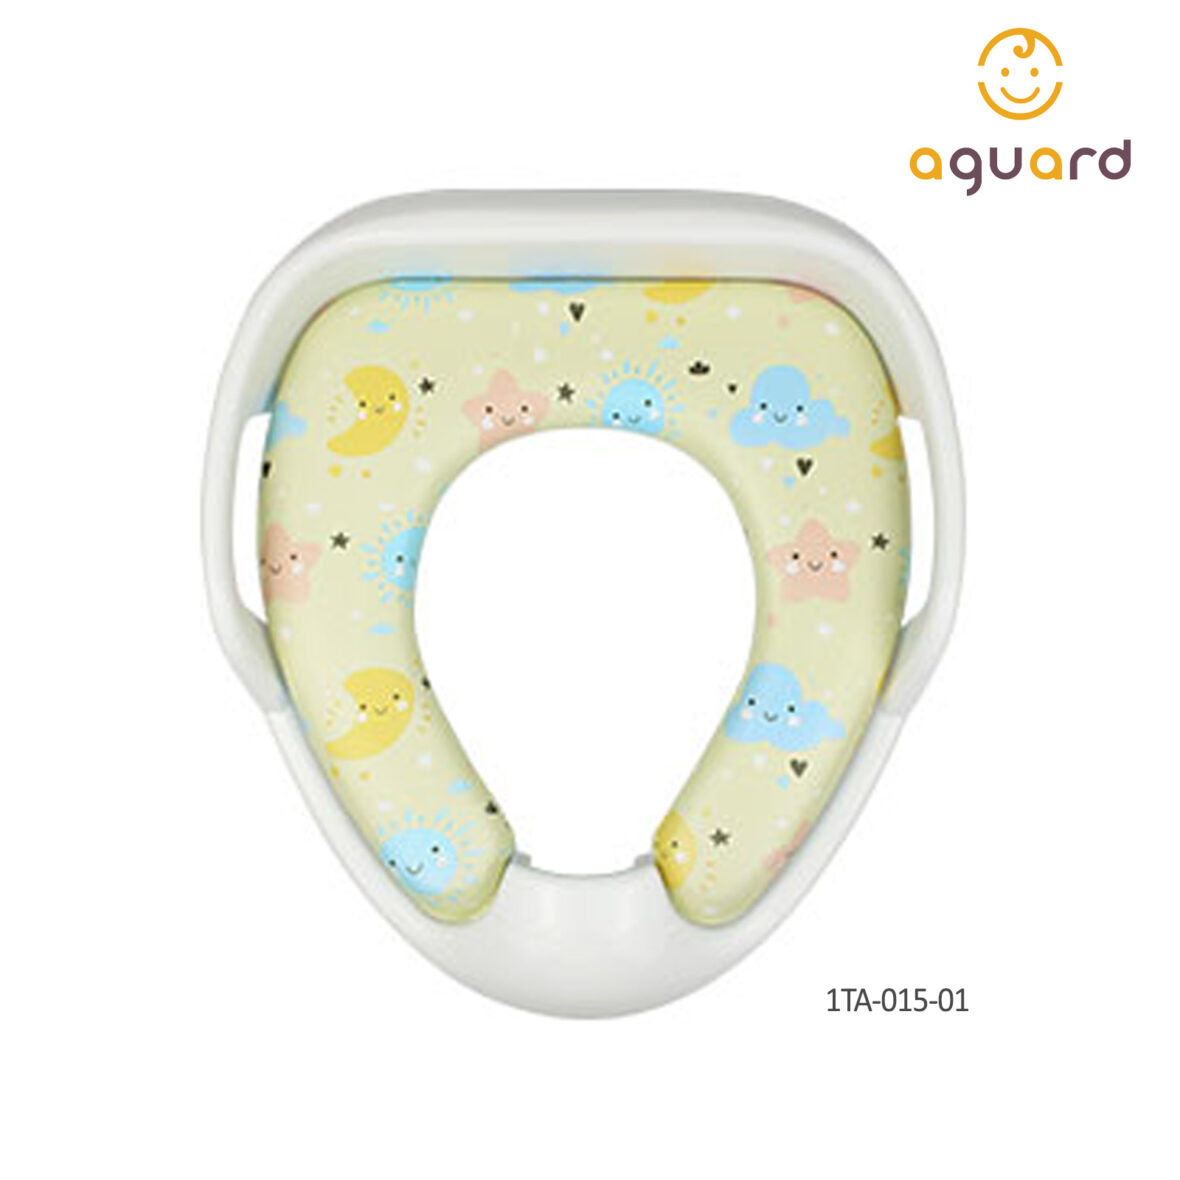 AGUARD Toilet Seat Cover with Handle